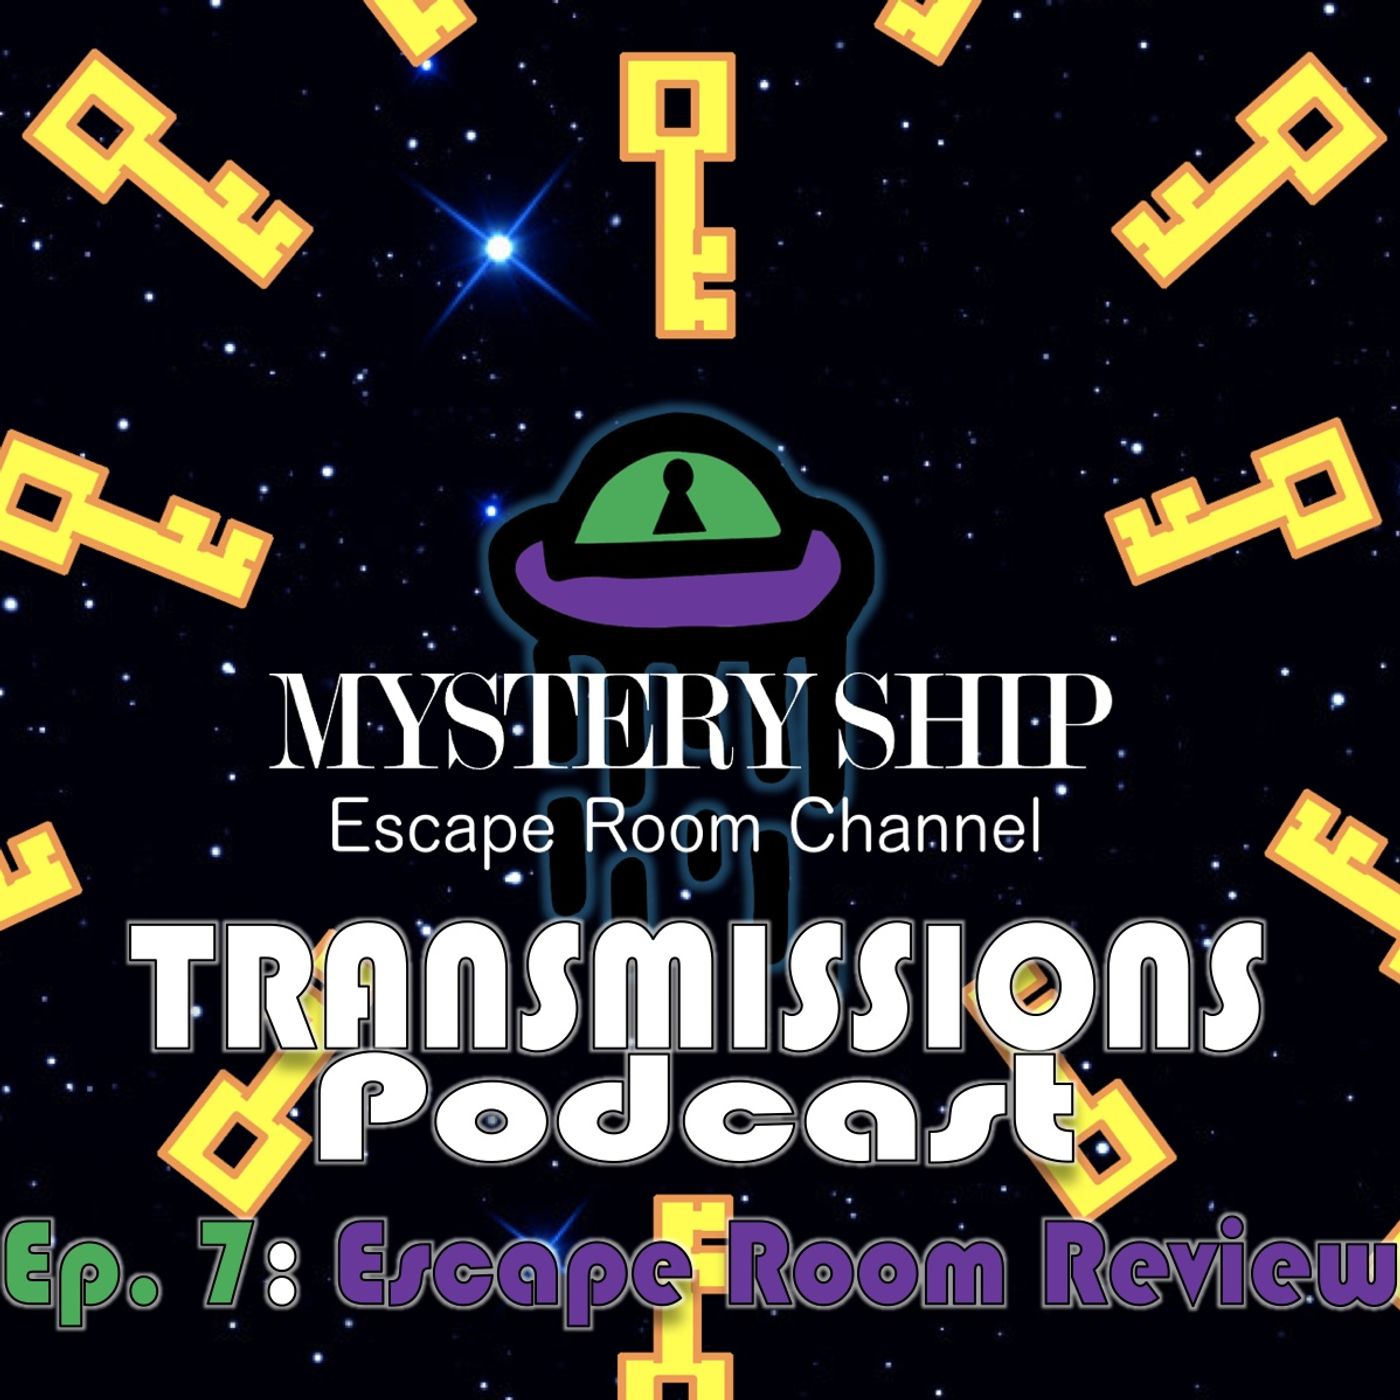 Ep7 Escape Room Review: Knights of the Round Table - Mystery Ship Transmissions Podcast